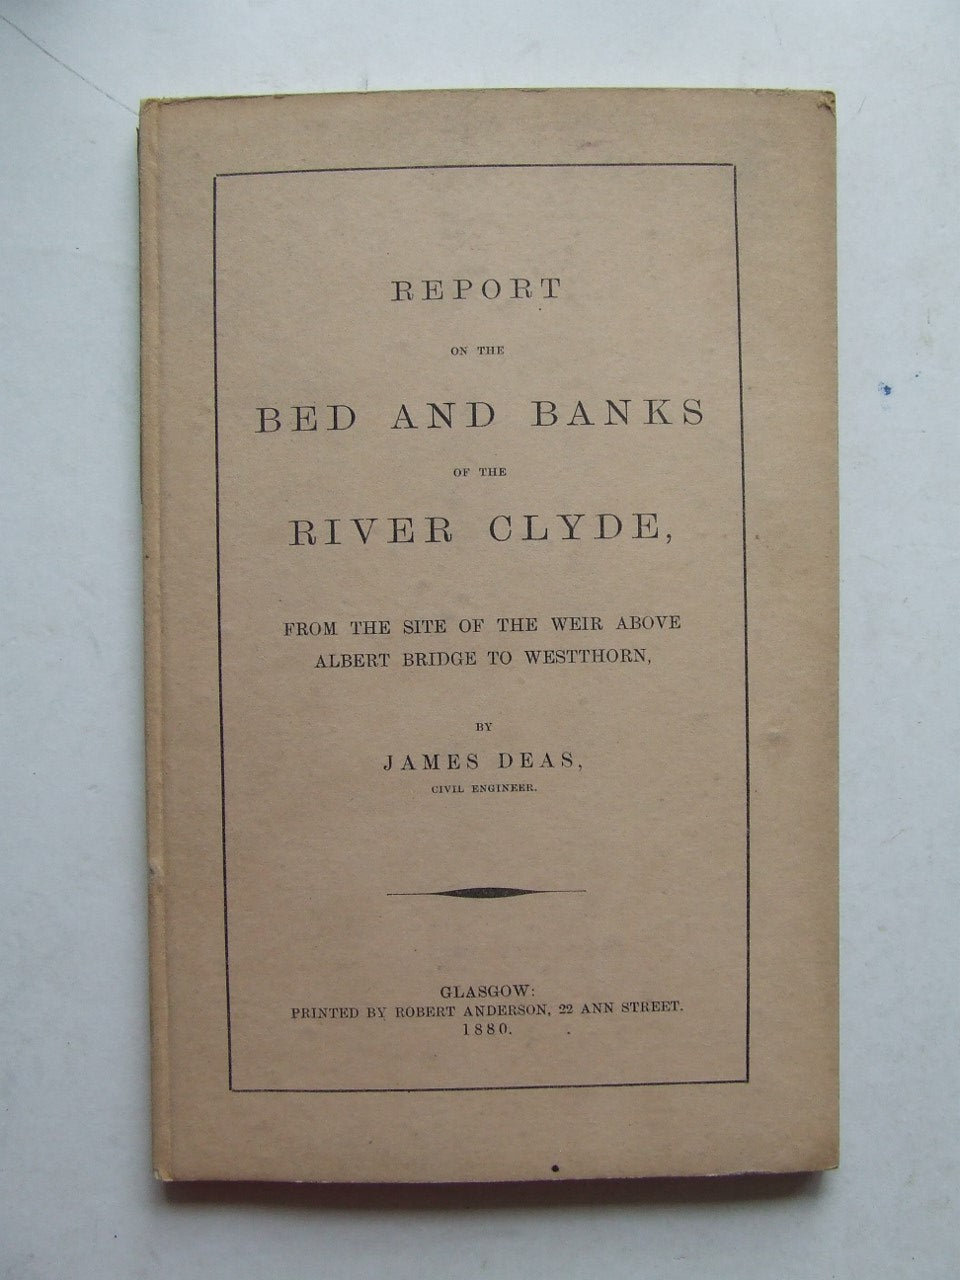 Report on the Bed and Banks of the River Clyde